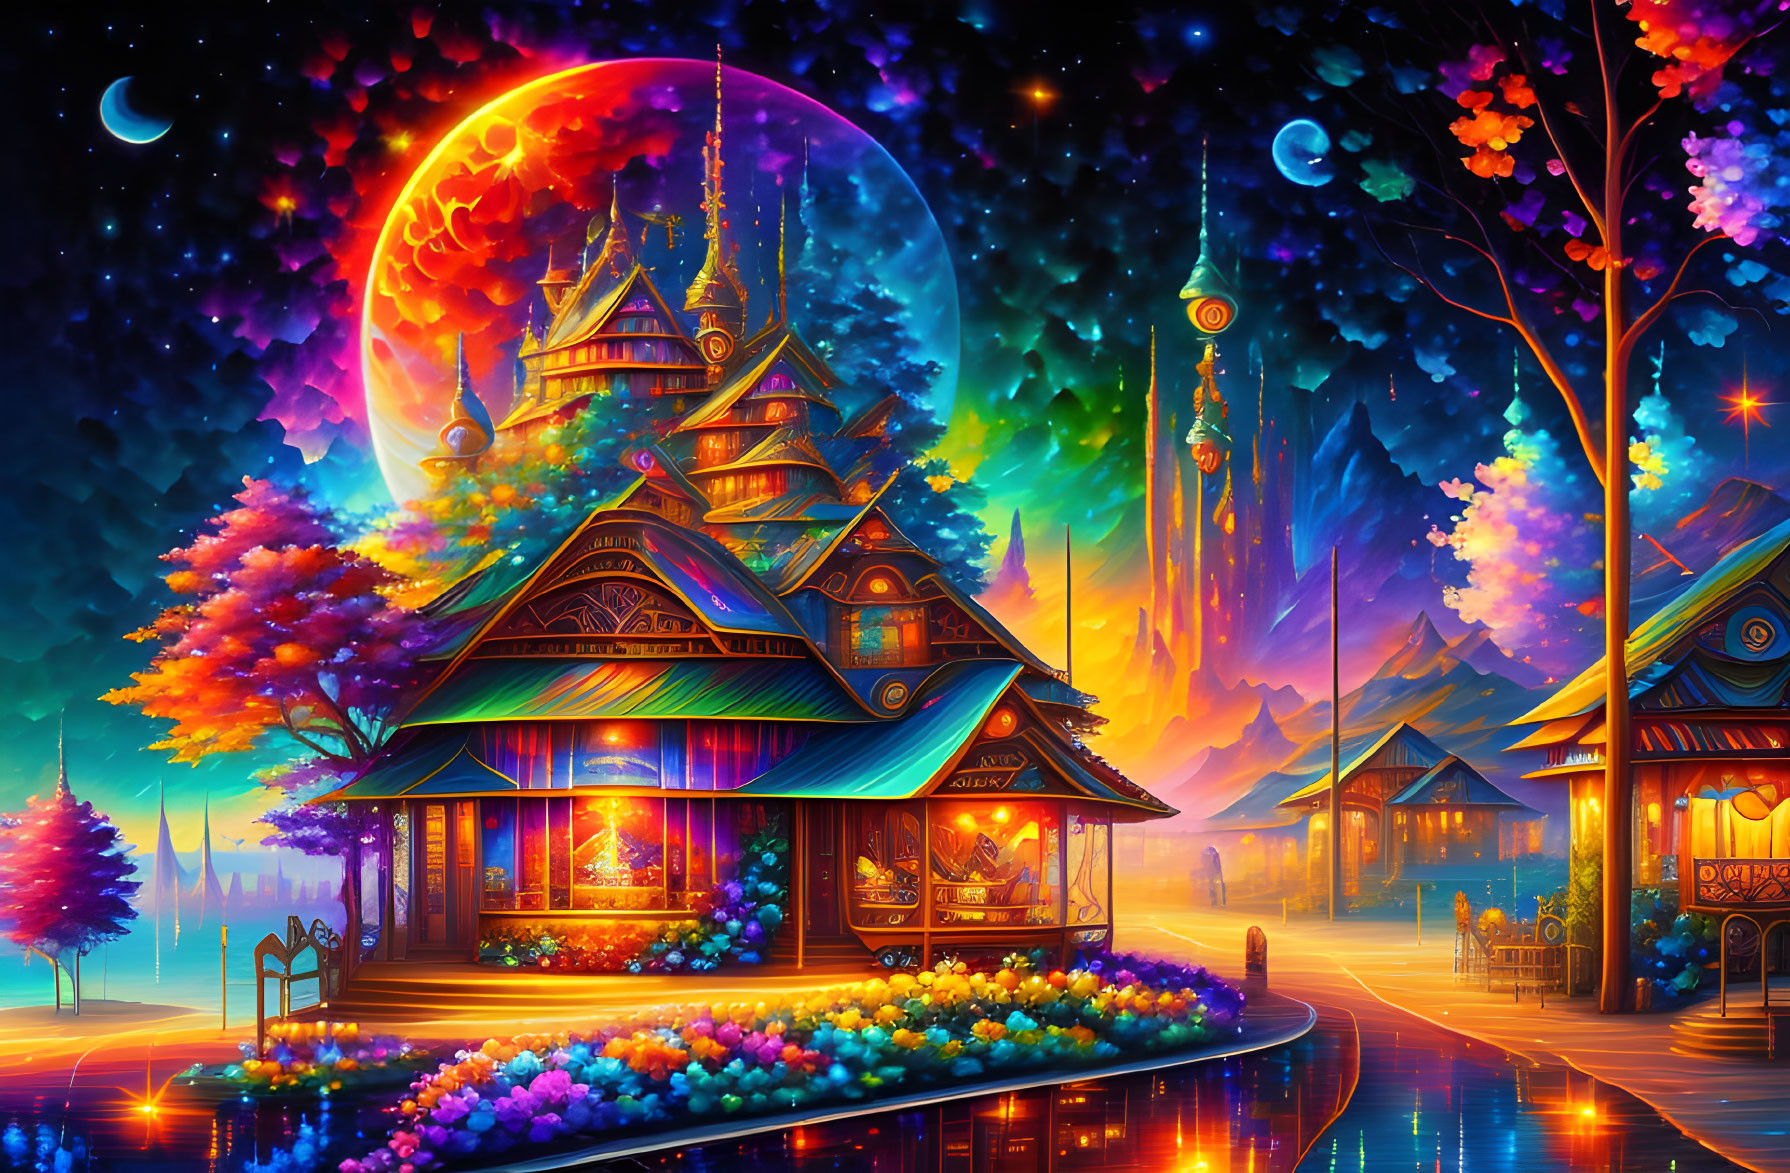 Colorful Fantasy Artwork of Wooden Structure and Magical Sky